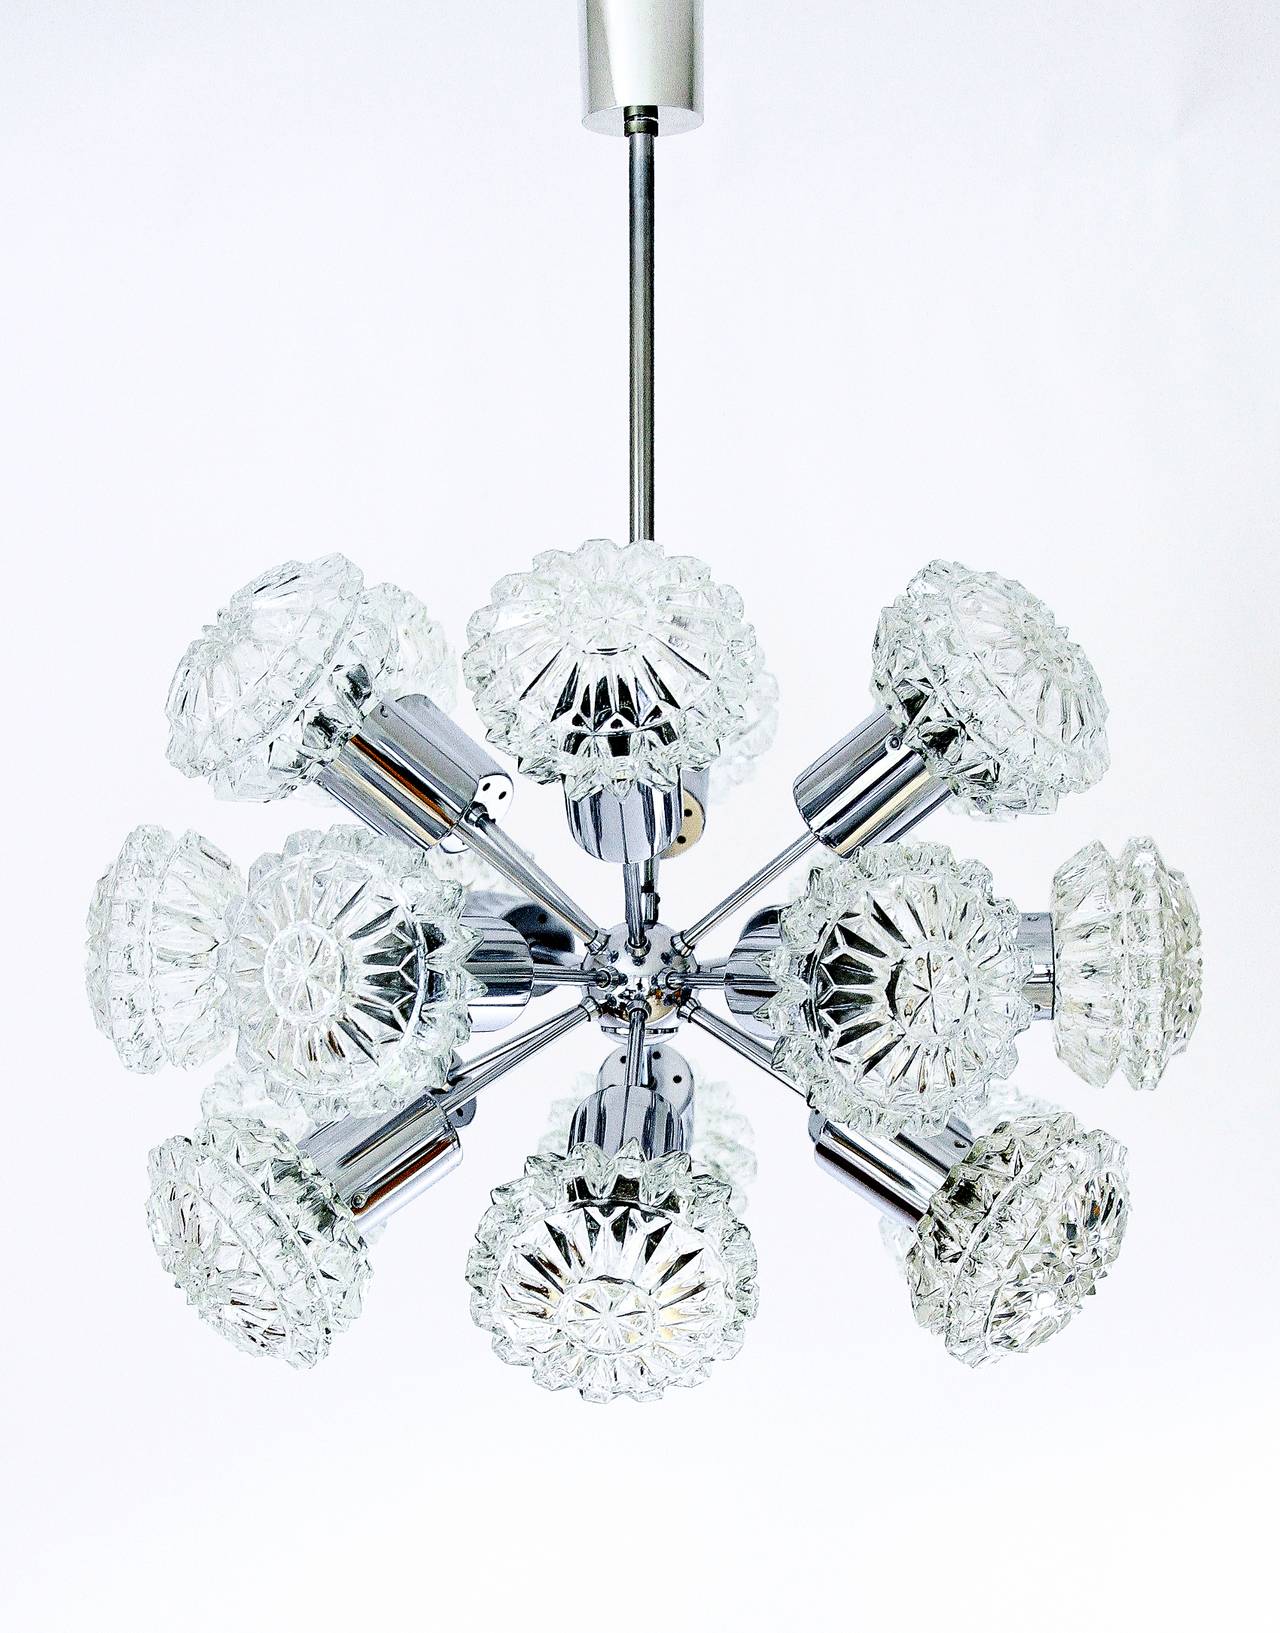 A 18 arm sputnik chandelier with dramatic textured glass covers and a chrome frame, manufactured in Germany in Mid-Century, circa 1970.
The design is attributed to Richard Essig.
The lamp has 18 sockets for small Edison screw base bulbs or LEDs (E14